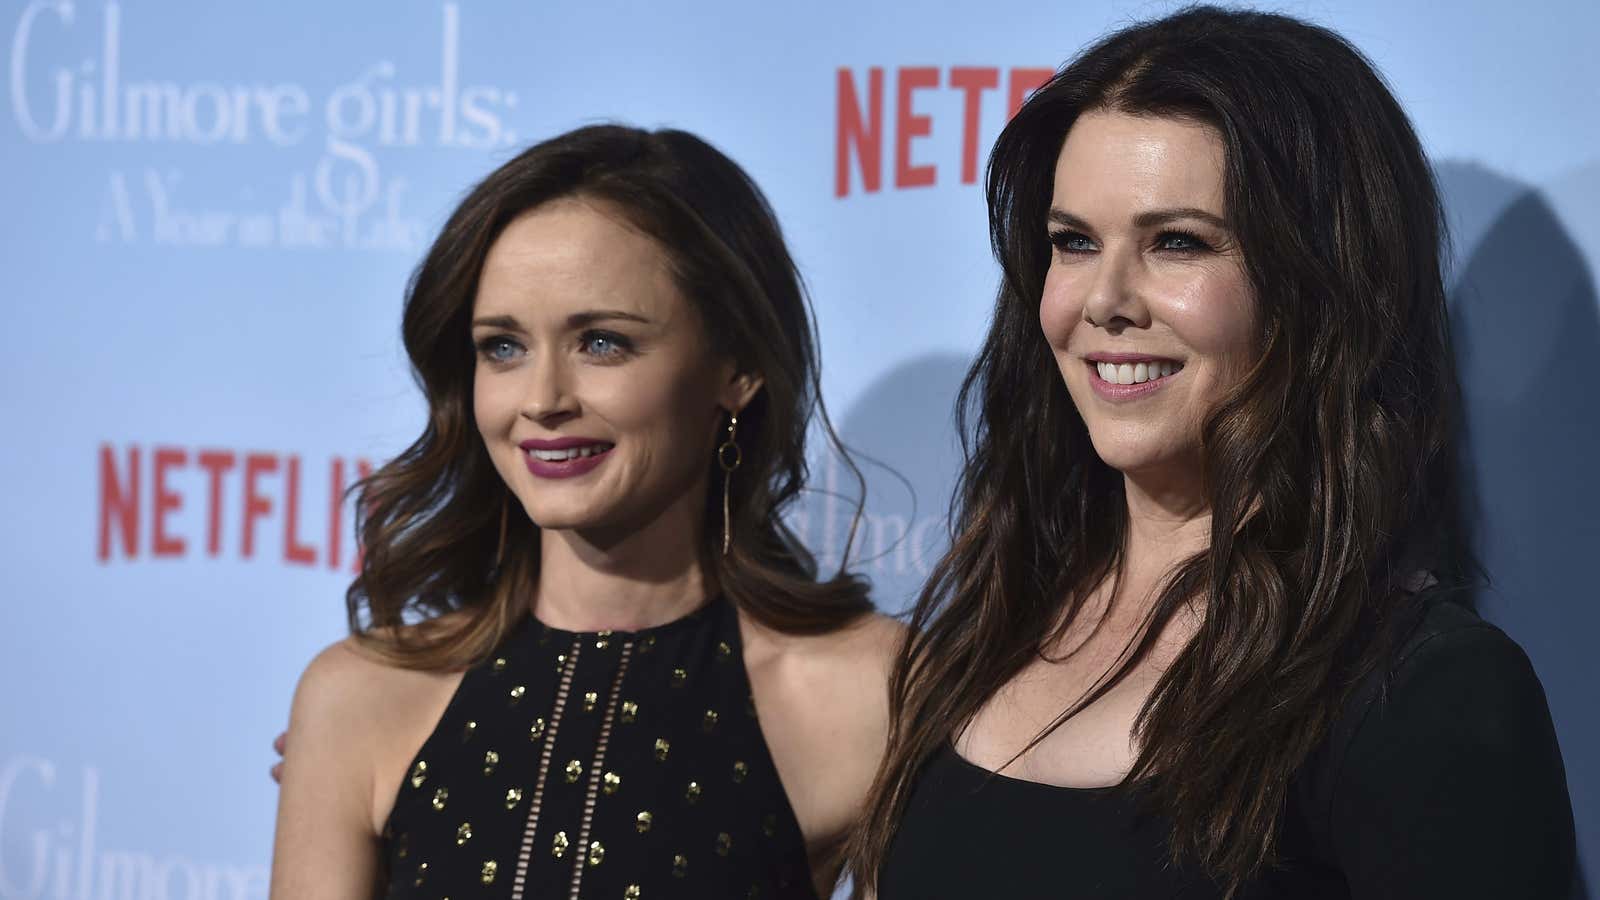 Alexis Bledel and Lauren Graham arrive at the premiere of “Gilmore Girls: A Year in the Life” on Friday, Nov. 18, 2016, in Los Angeles. (Photo by Jordan Strauss/Invision/AP)